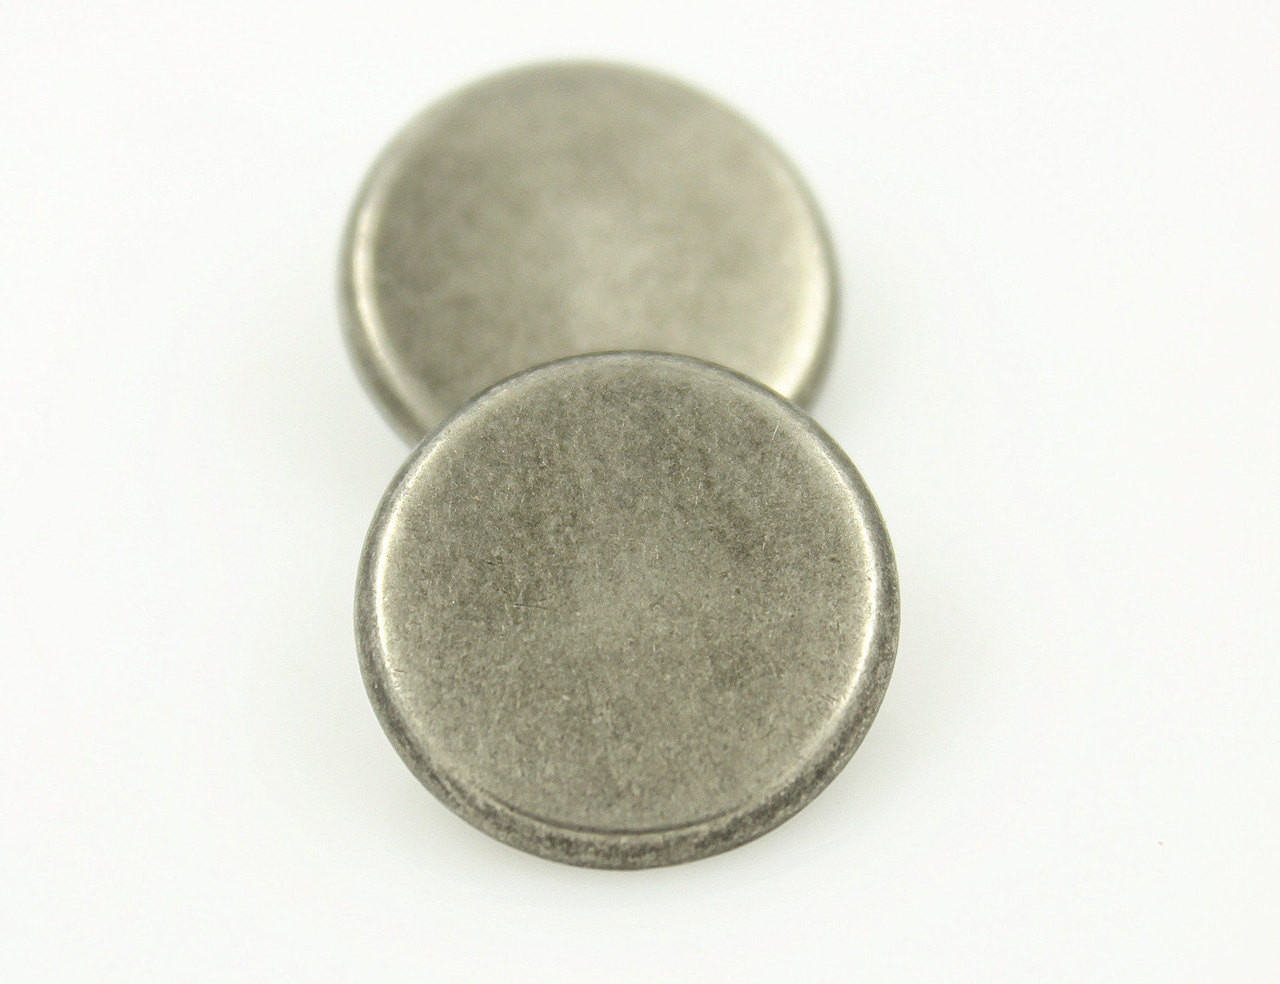 Nickel Silver Flat Round Metal Shank Buttons - 18mm - 11/16 inch